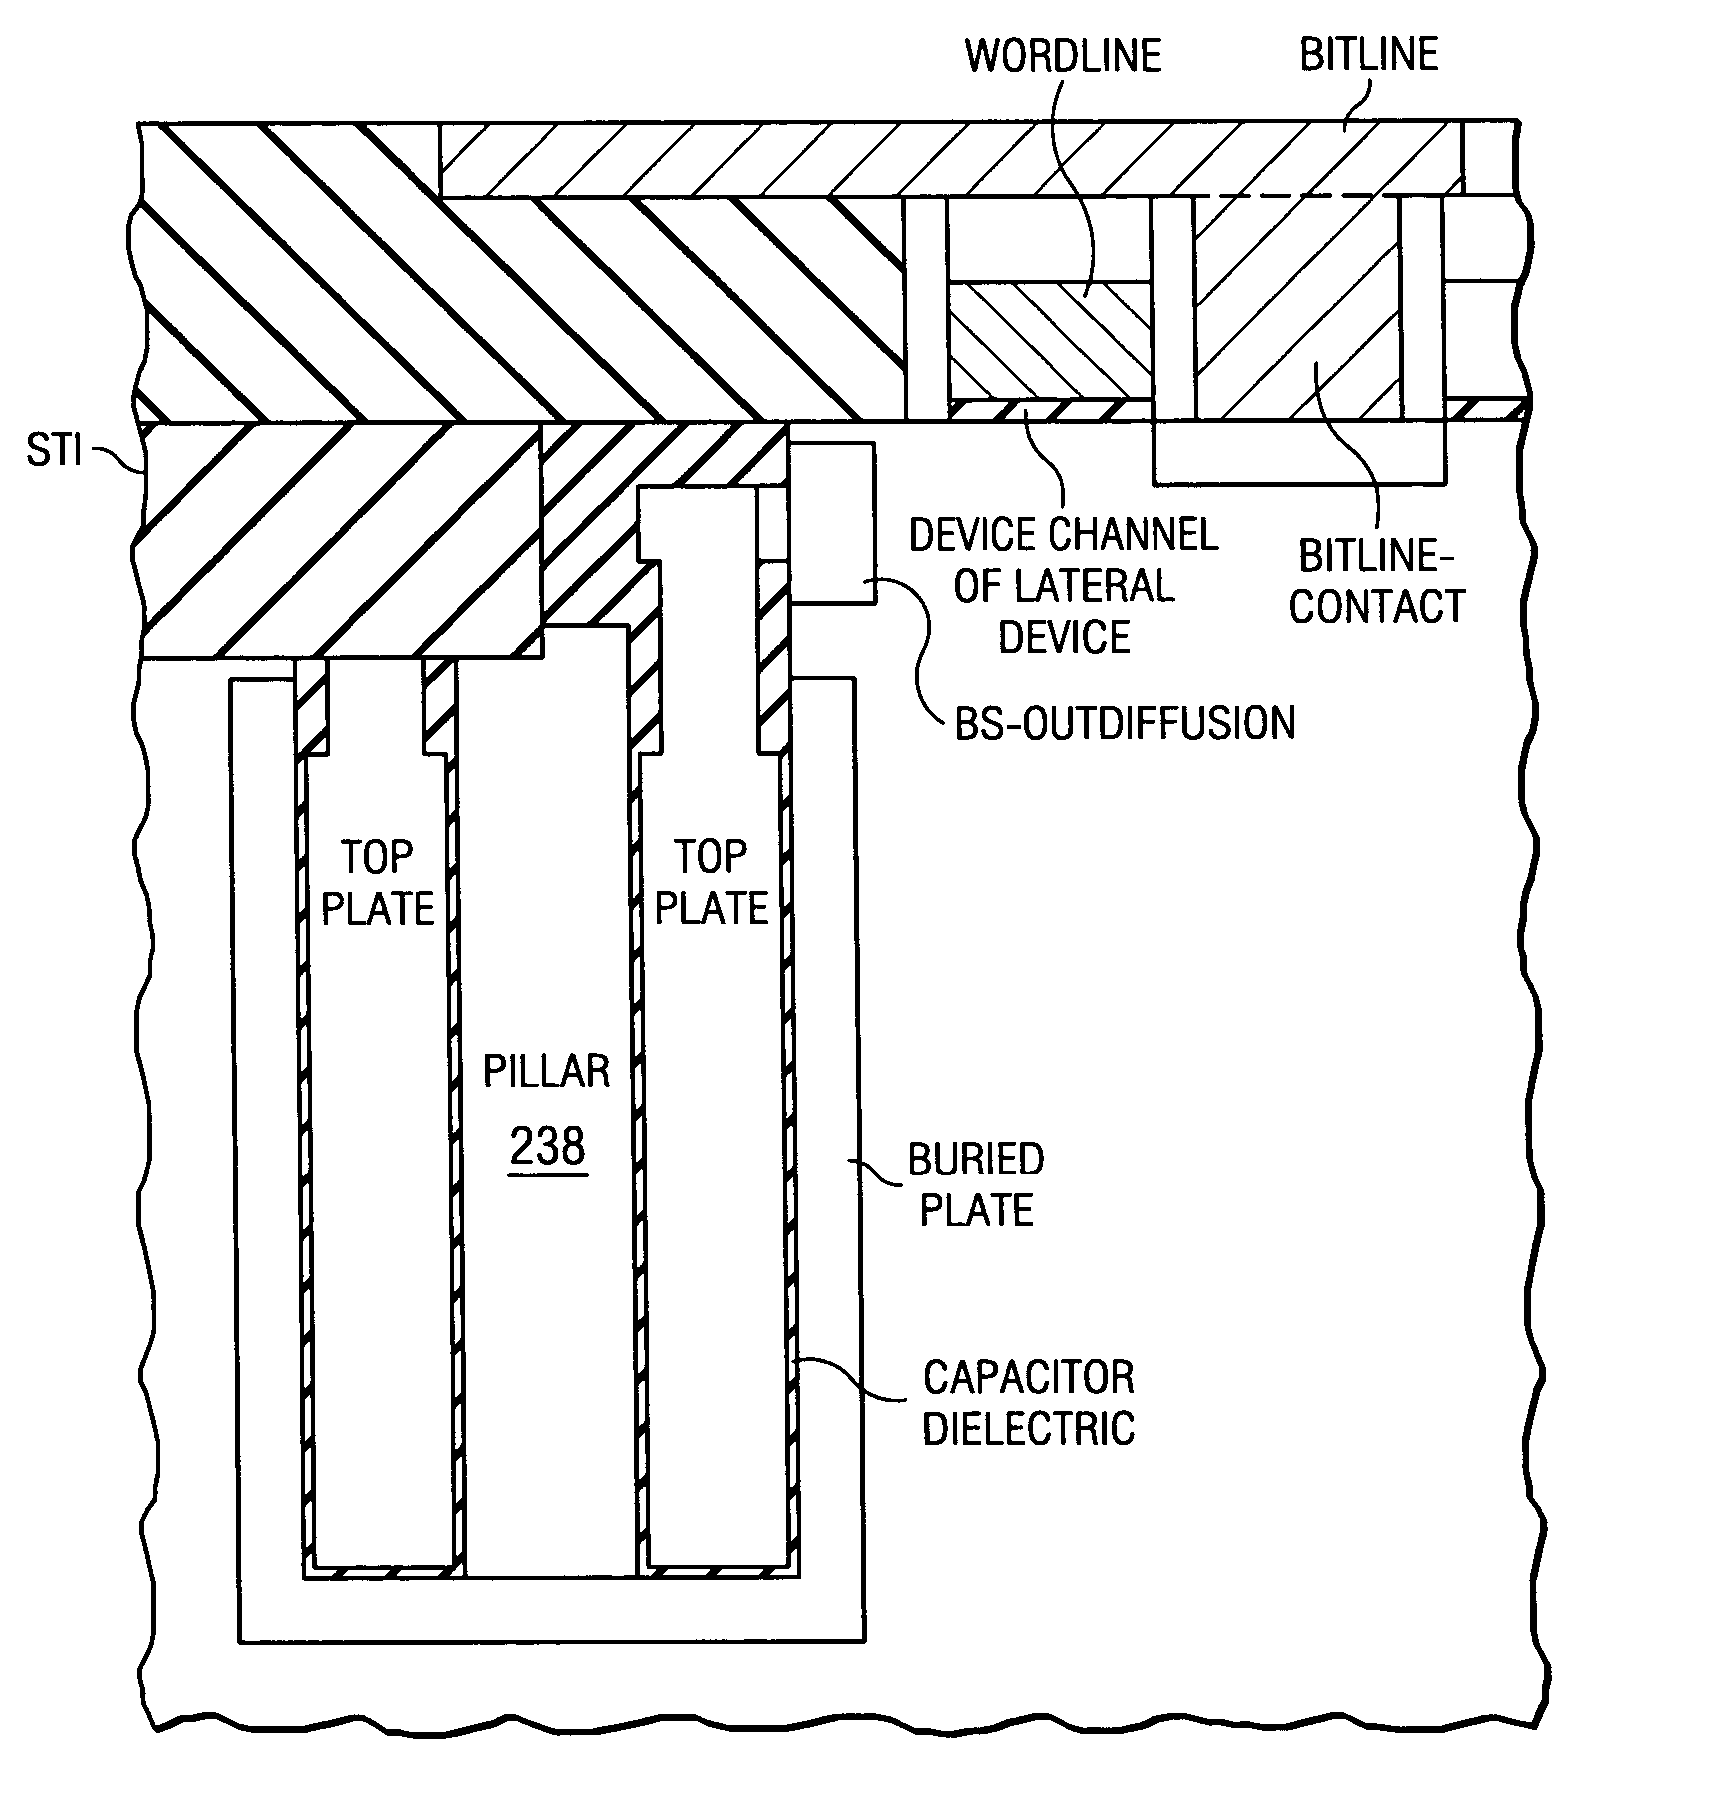 Trench capacitor with pillar